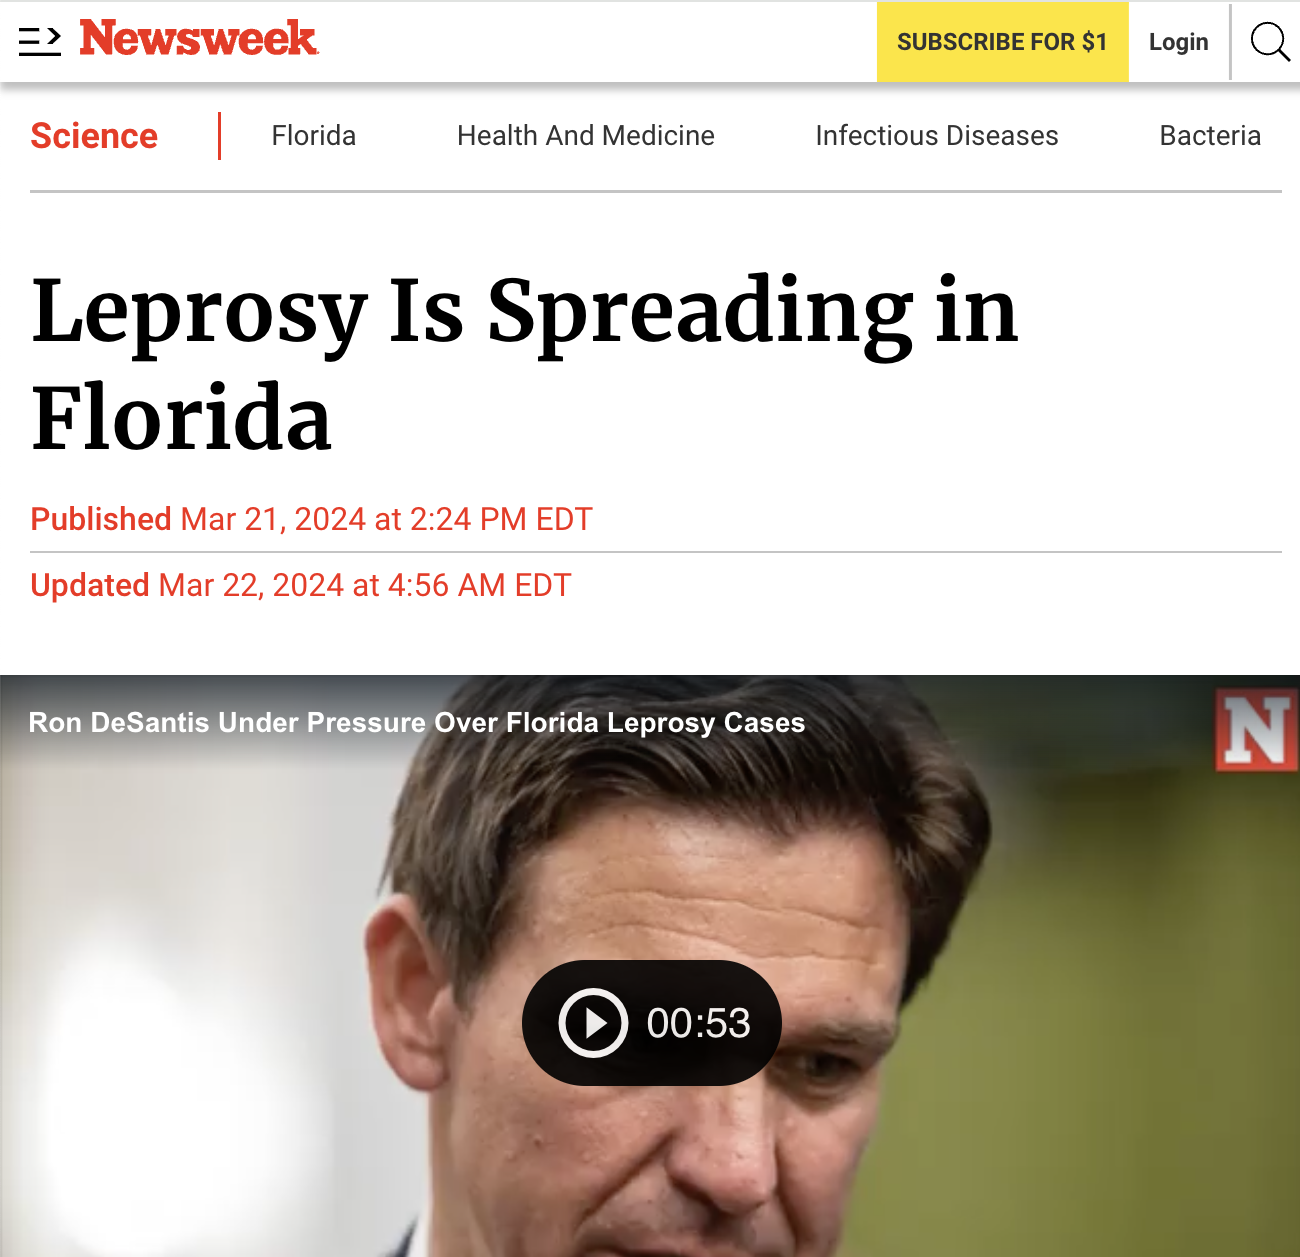 website - > Newsweek Science Subscribe For $1 Login Q Florida Health And Medicine Infectious Diseases Leprosy Is Spreading in Florida Published at Edt Updated at Edt Ron DeSantis Under Pressure Over Florida Leprosy Cases Bacteria N